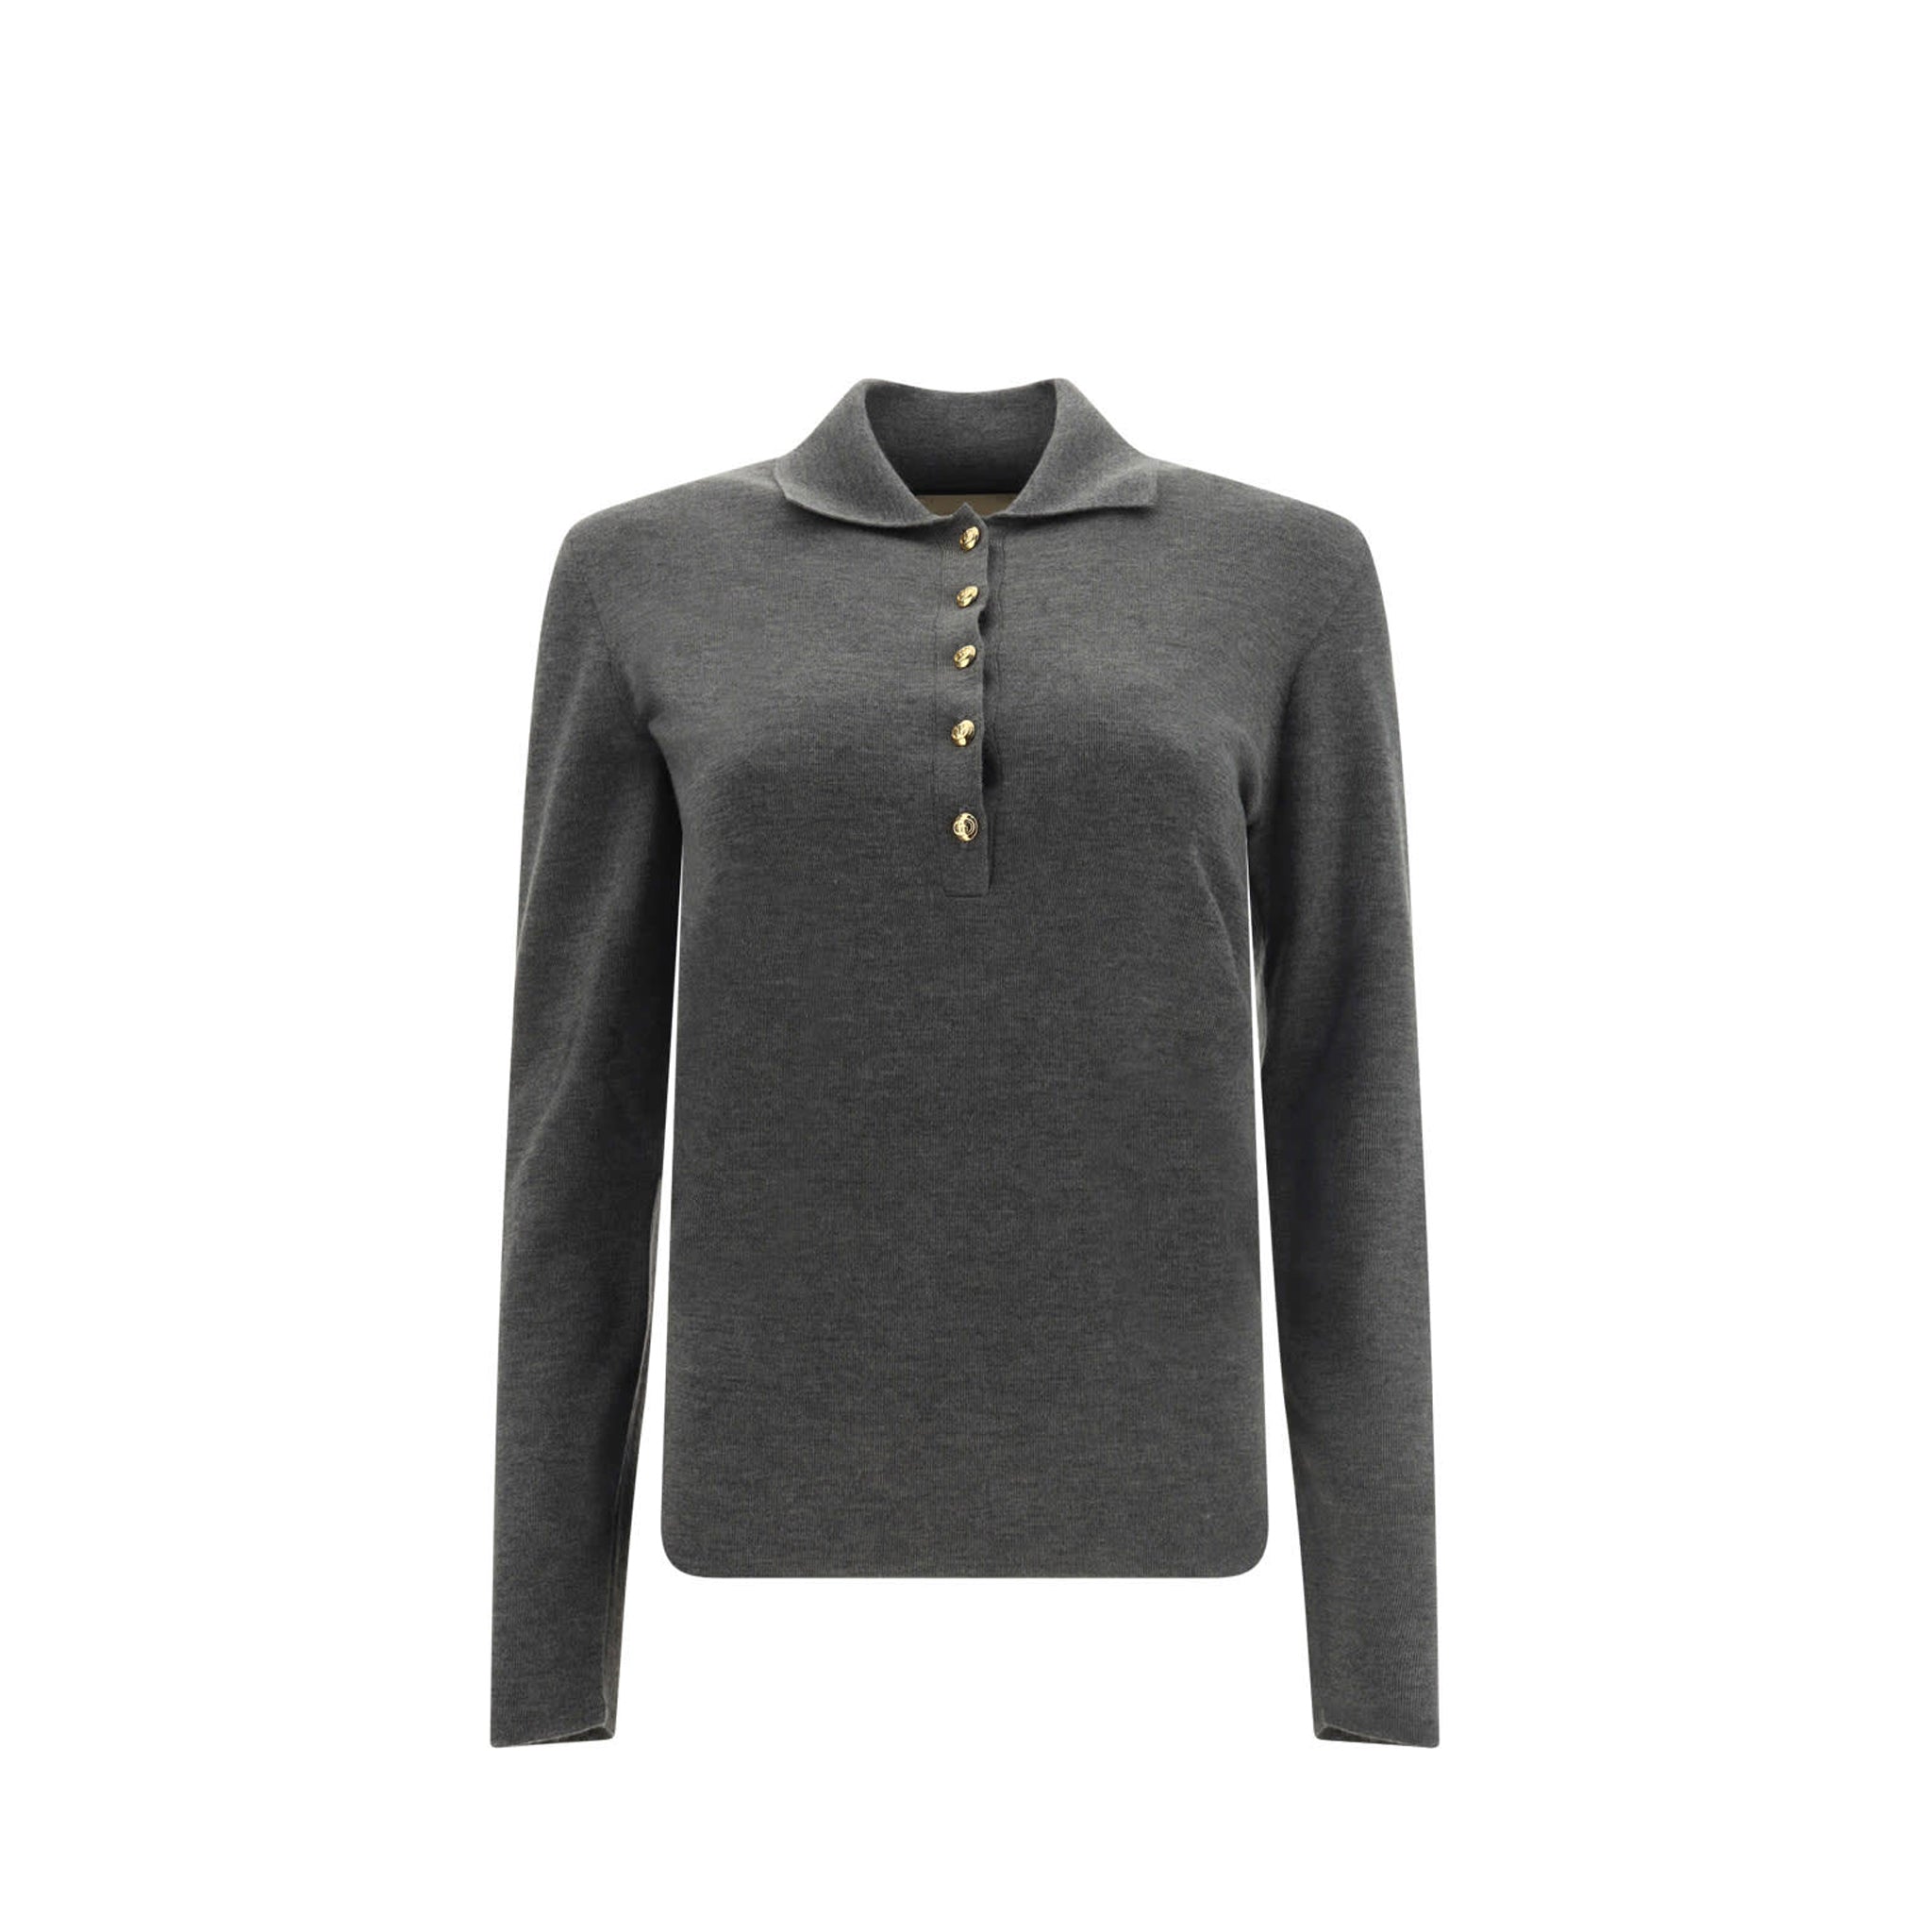 GUCCI-OUTLET-SALE-Gucci-Cashmere-Polo-WOMEN-CLOTHING-ARCHIVE-COLLECTION.jpg